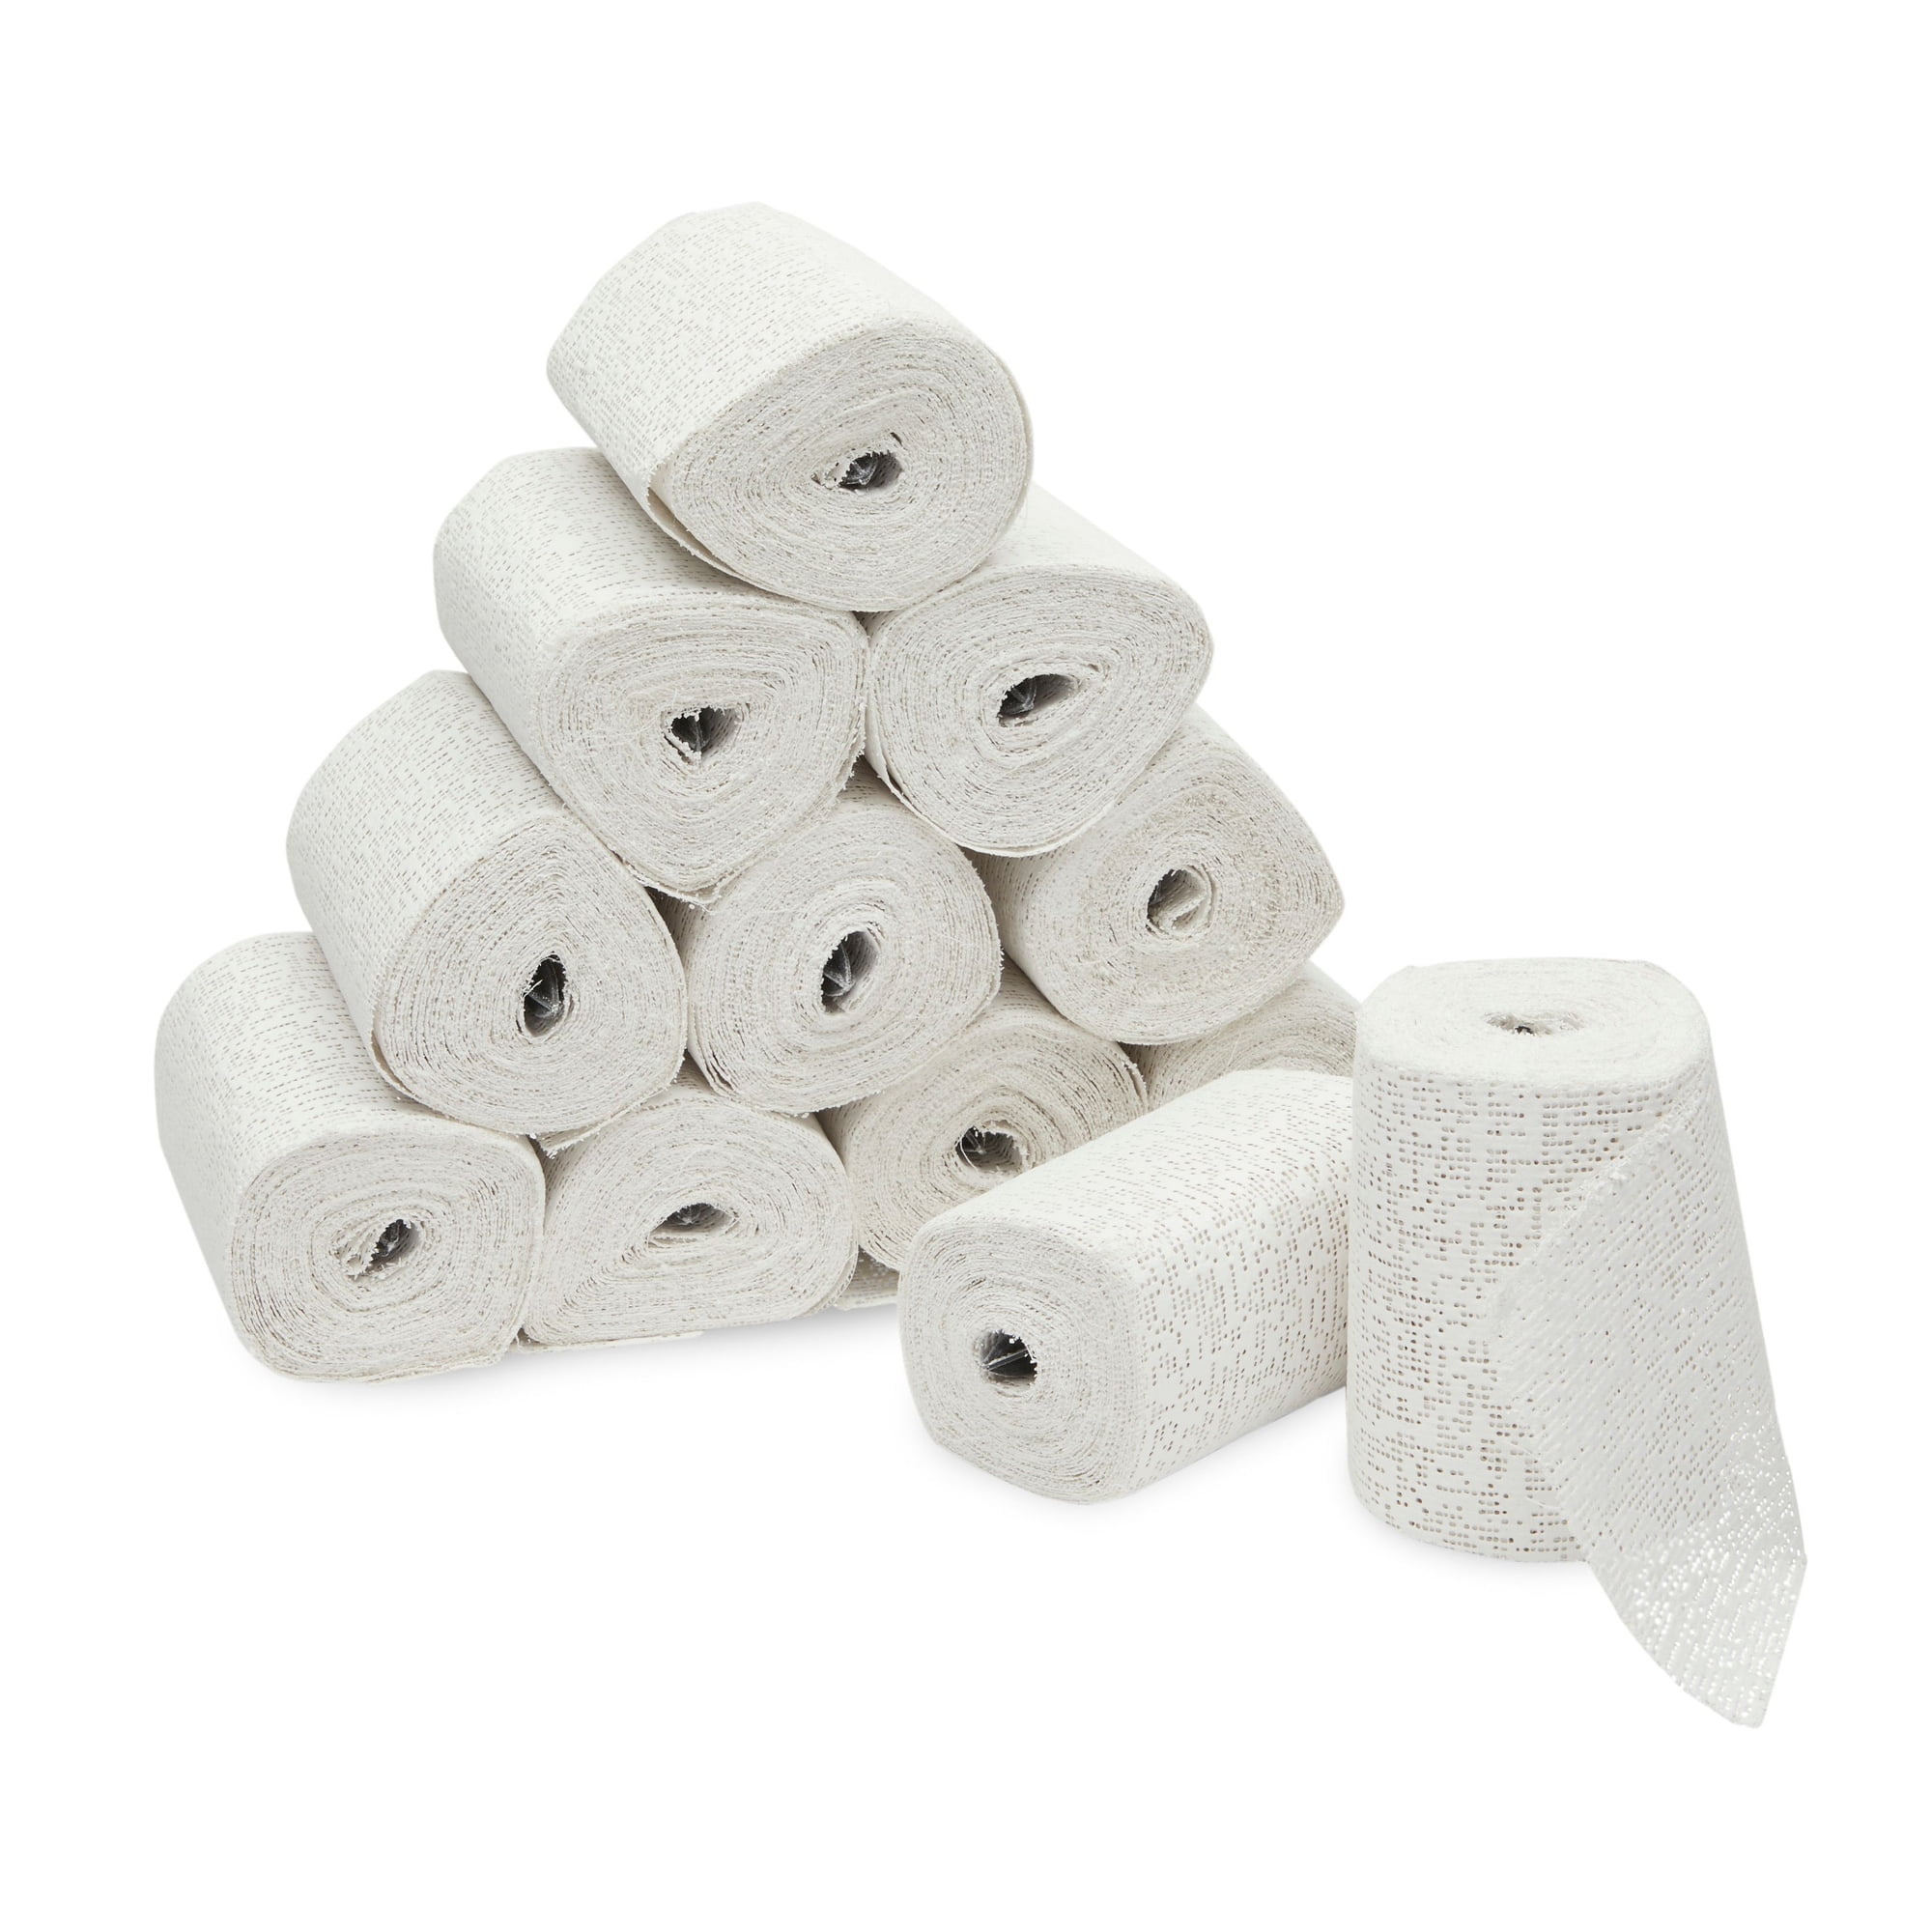 4 Pack Plaster Cloth Rolls for Belly Casting Crafts (6 in x 15 ft)